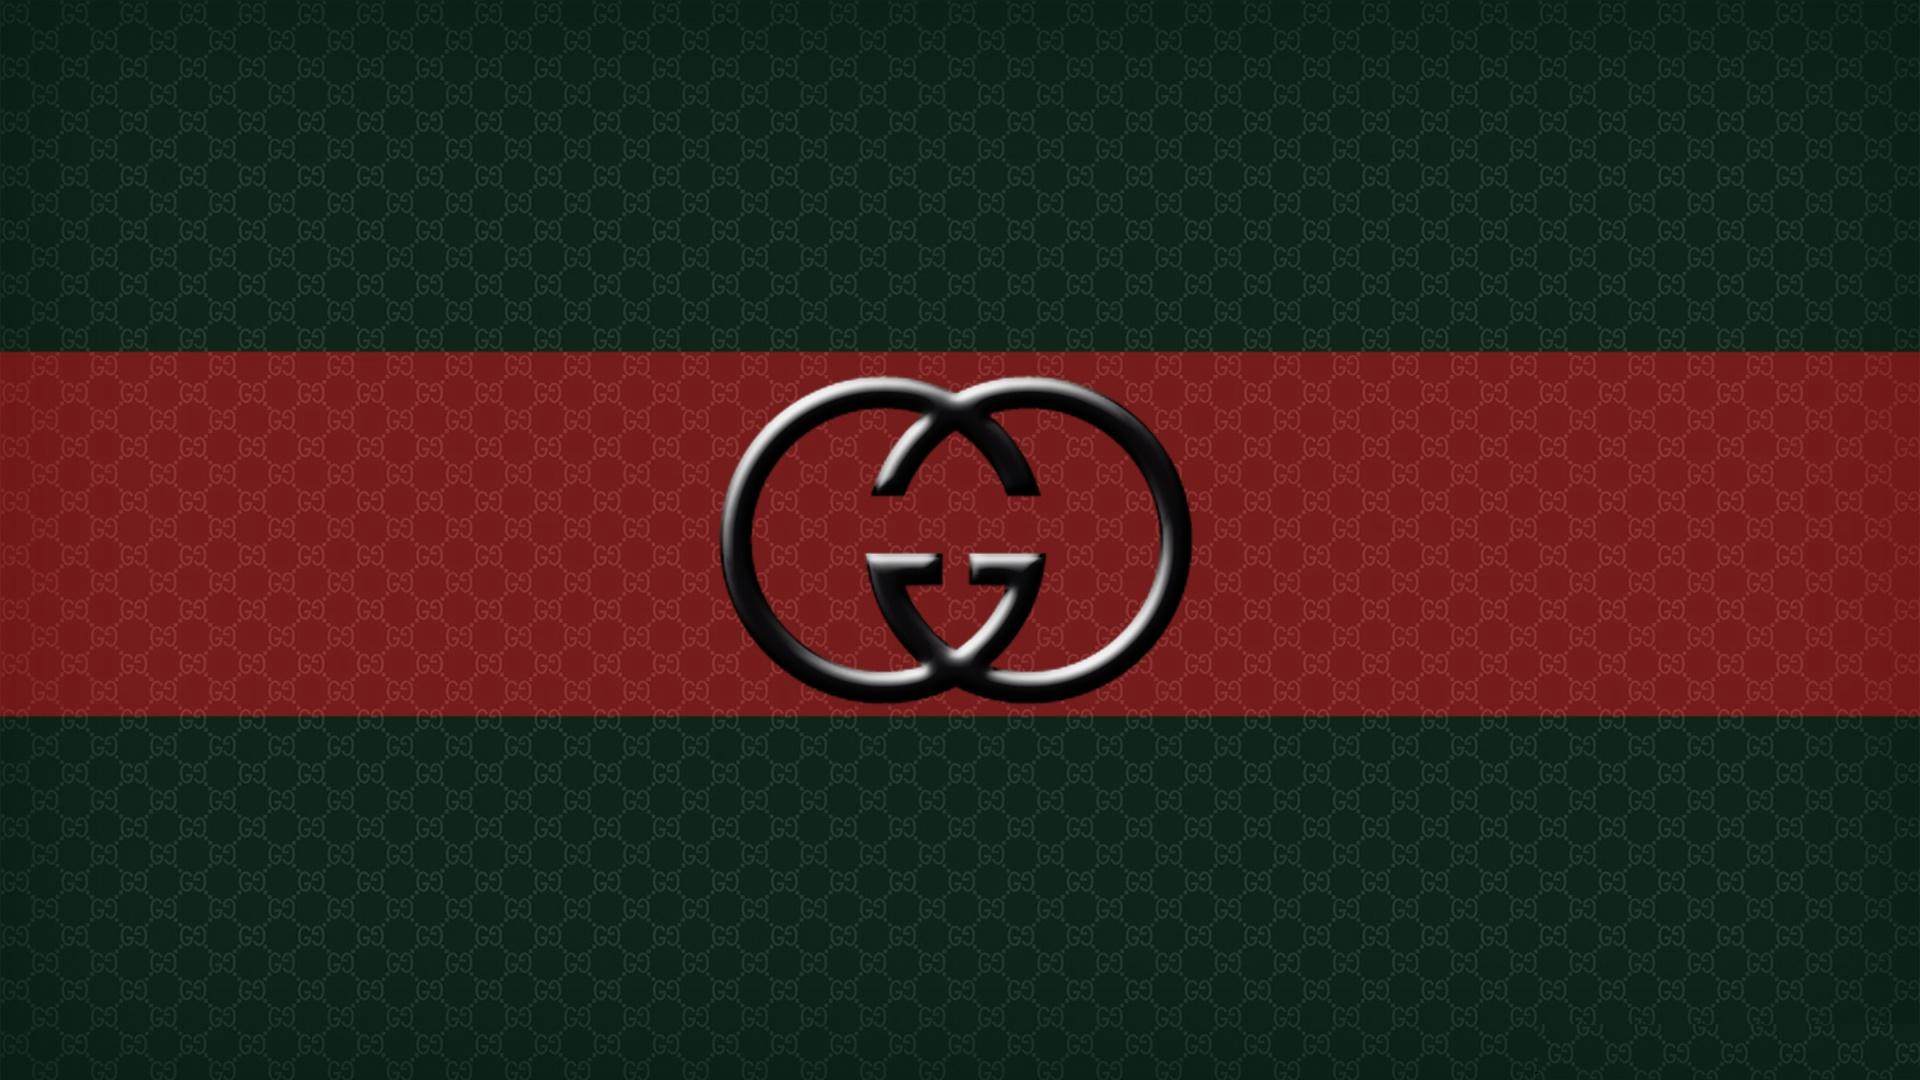 Supreme gucci LV wallpaper by societys2cent  Download on ZEDGE  2a27